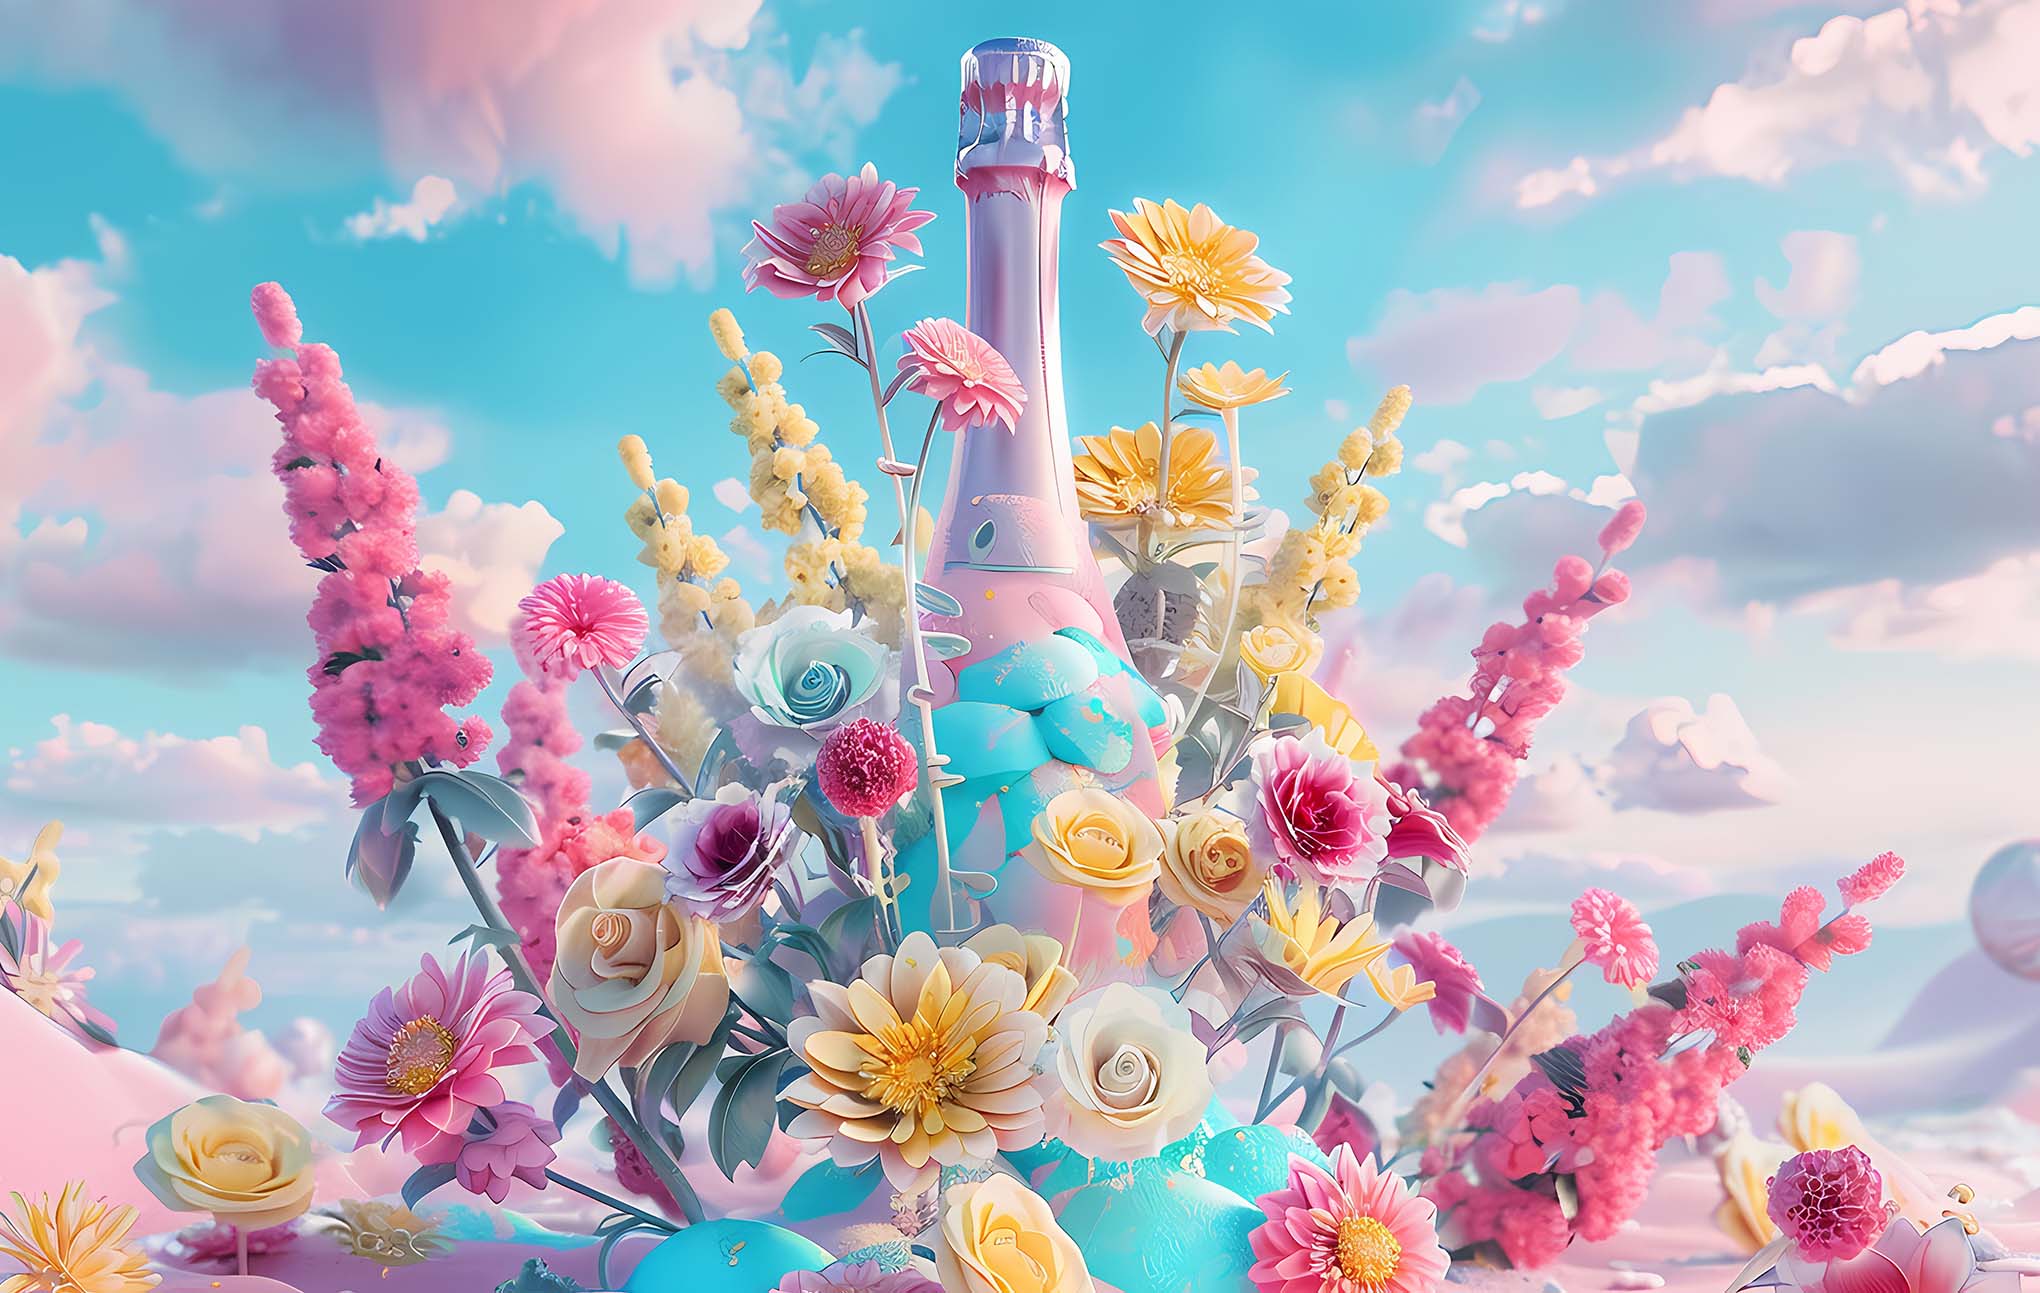 A vibrant and fantastical digital artwork featuring a central champagne bottle surrounded by a lush array of colorful flowers and whimsical pastel clouds in the background, creating a dreamy and serene atmosphere.